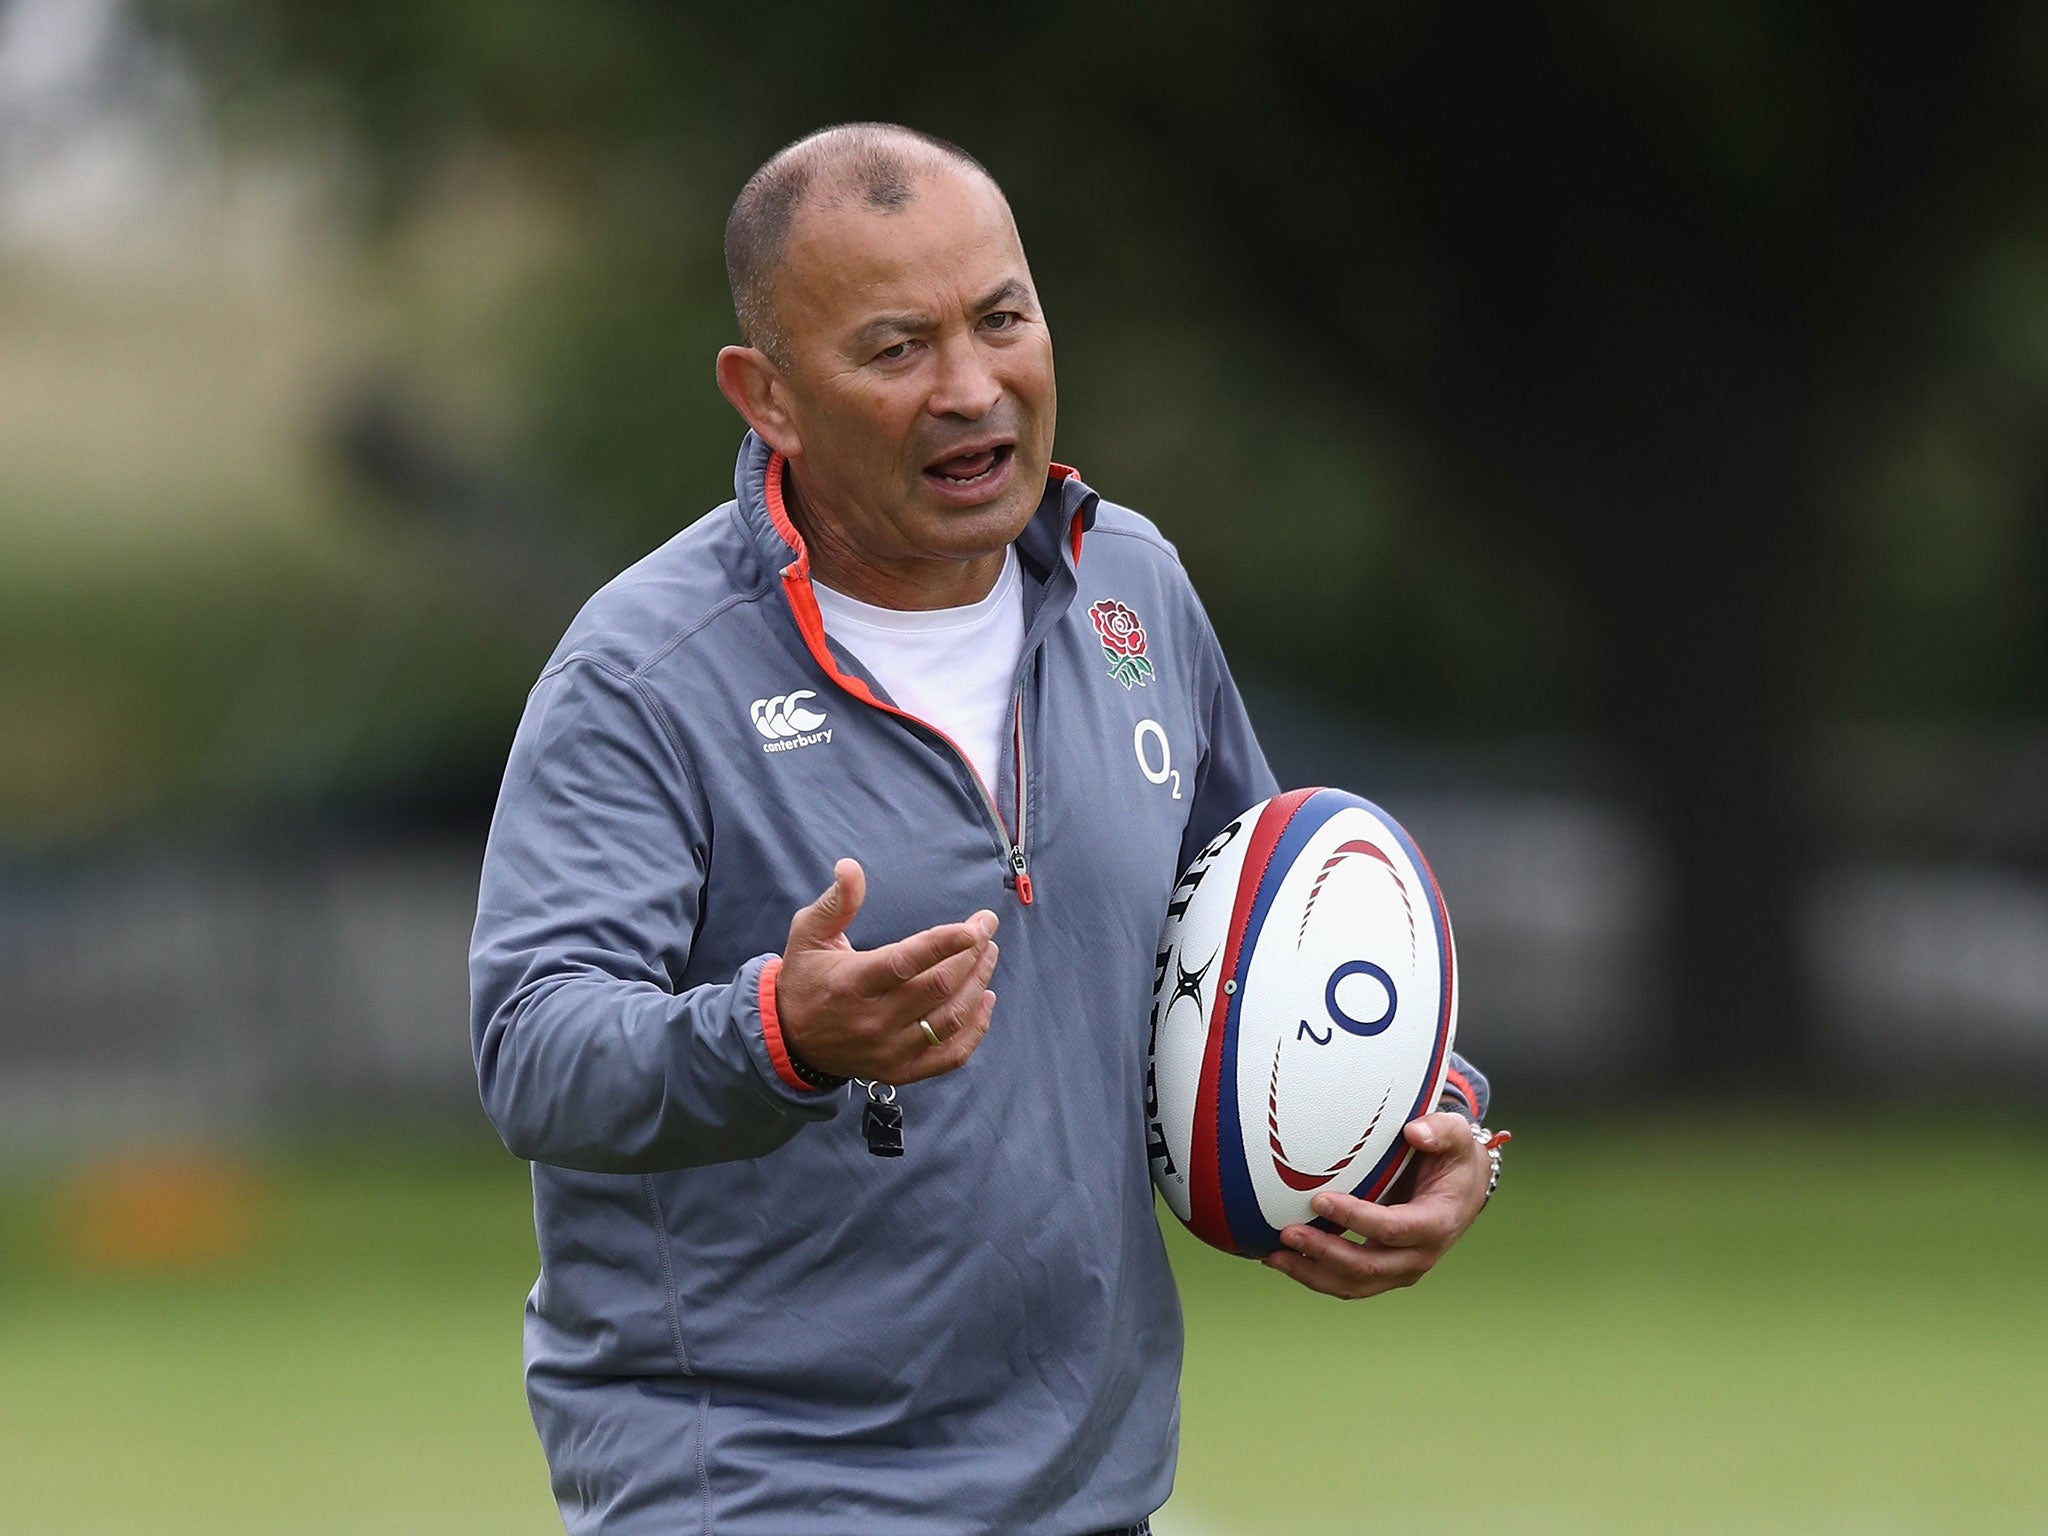 Jones wants his squad to understand the different cultures in Japan